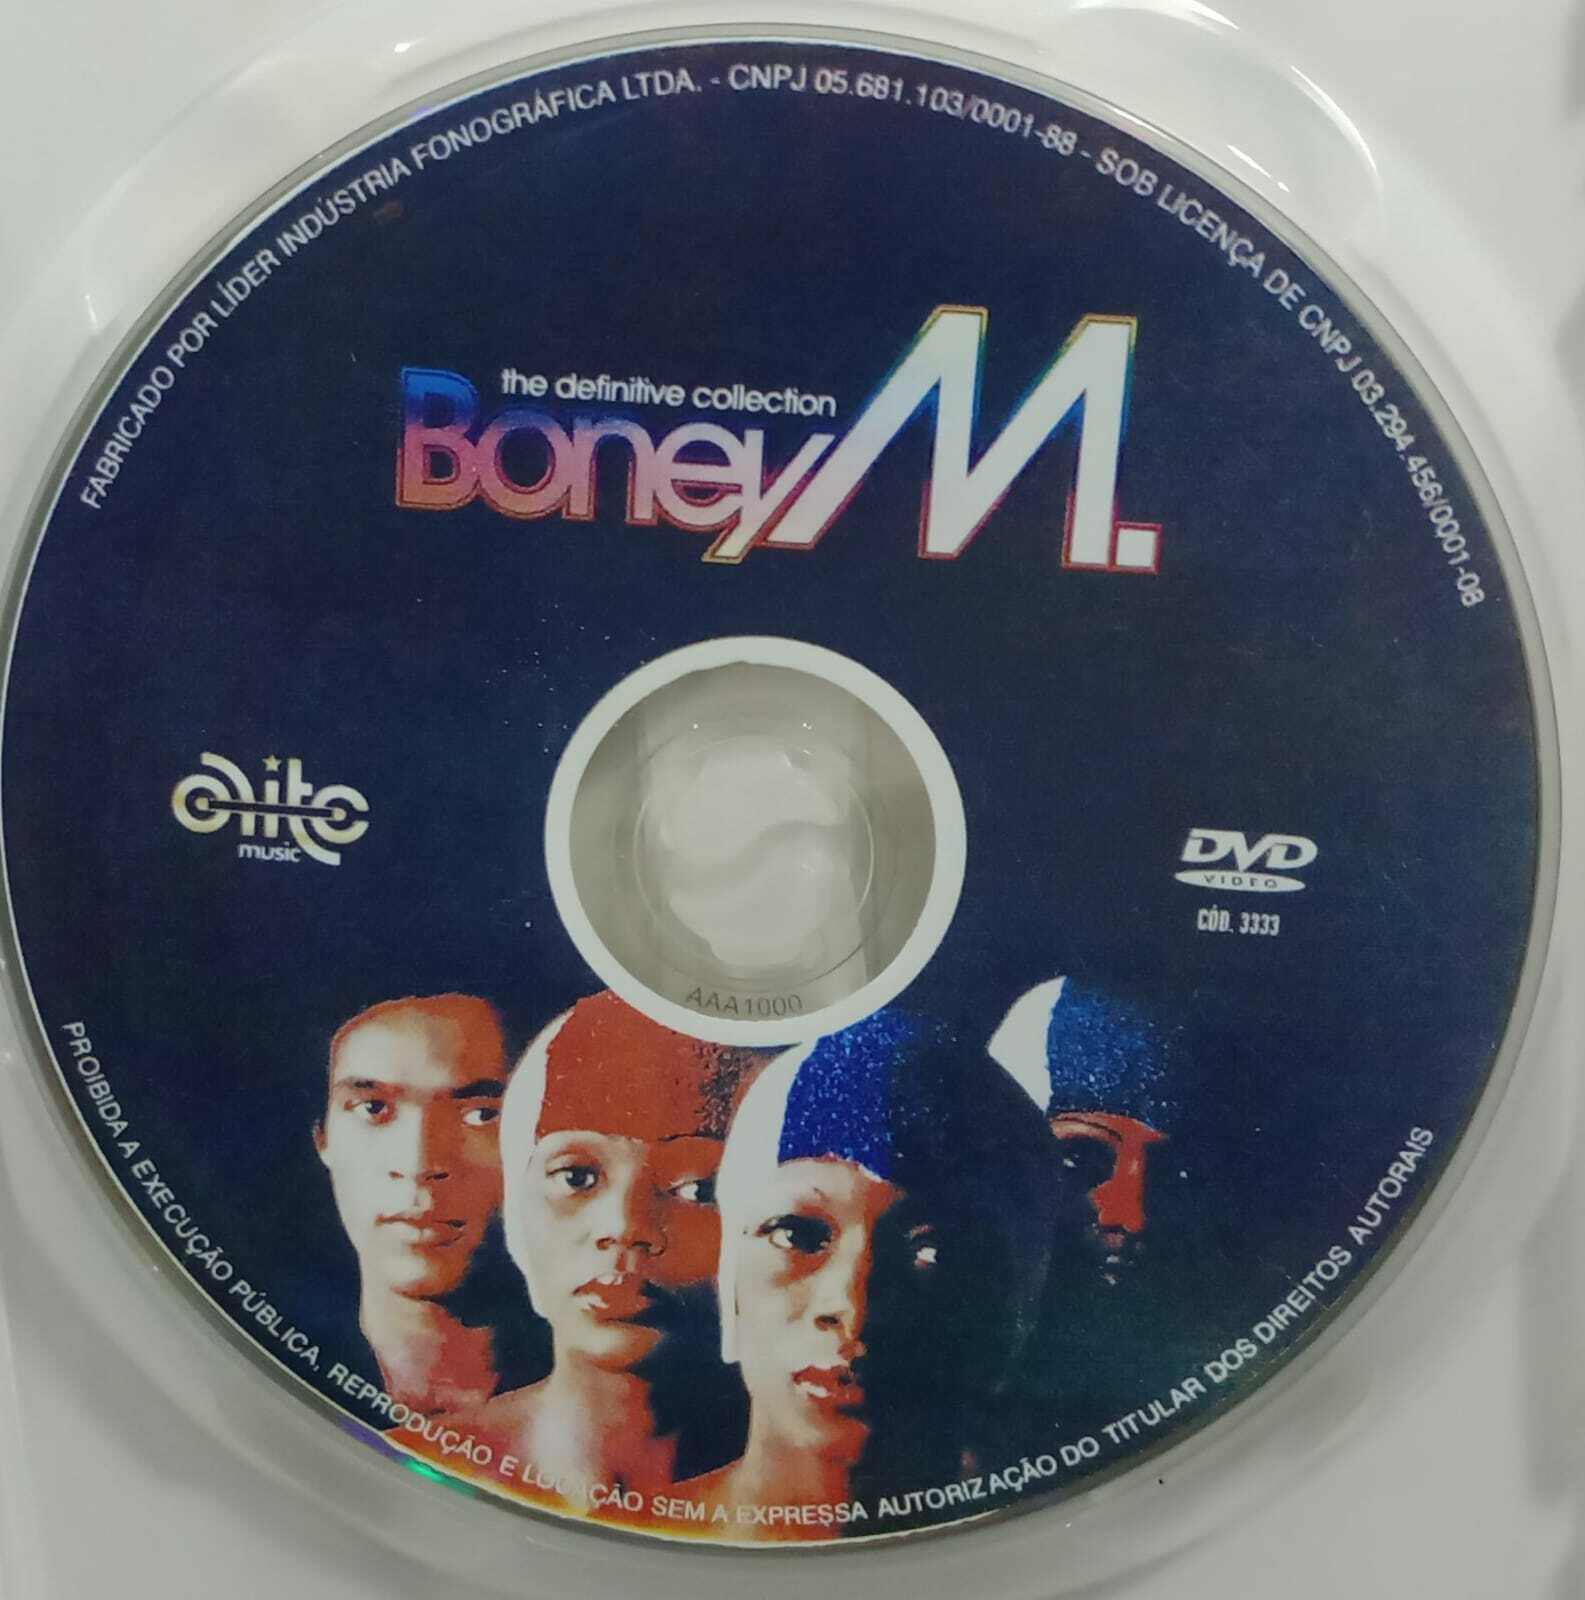 DVD - Boney M - The Definitive Collection